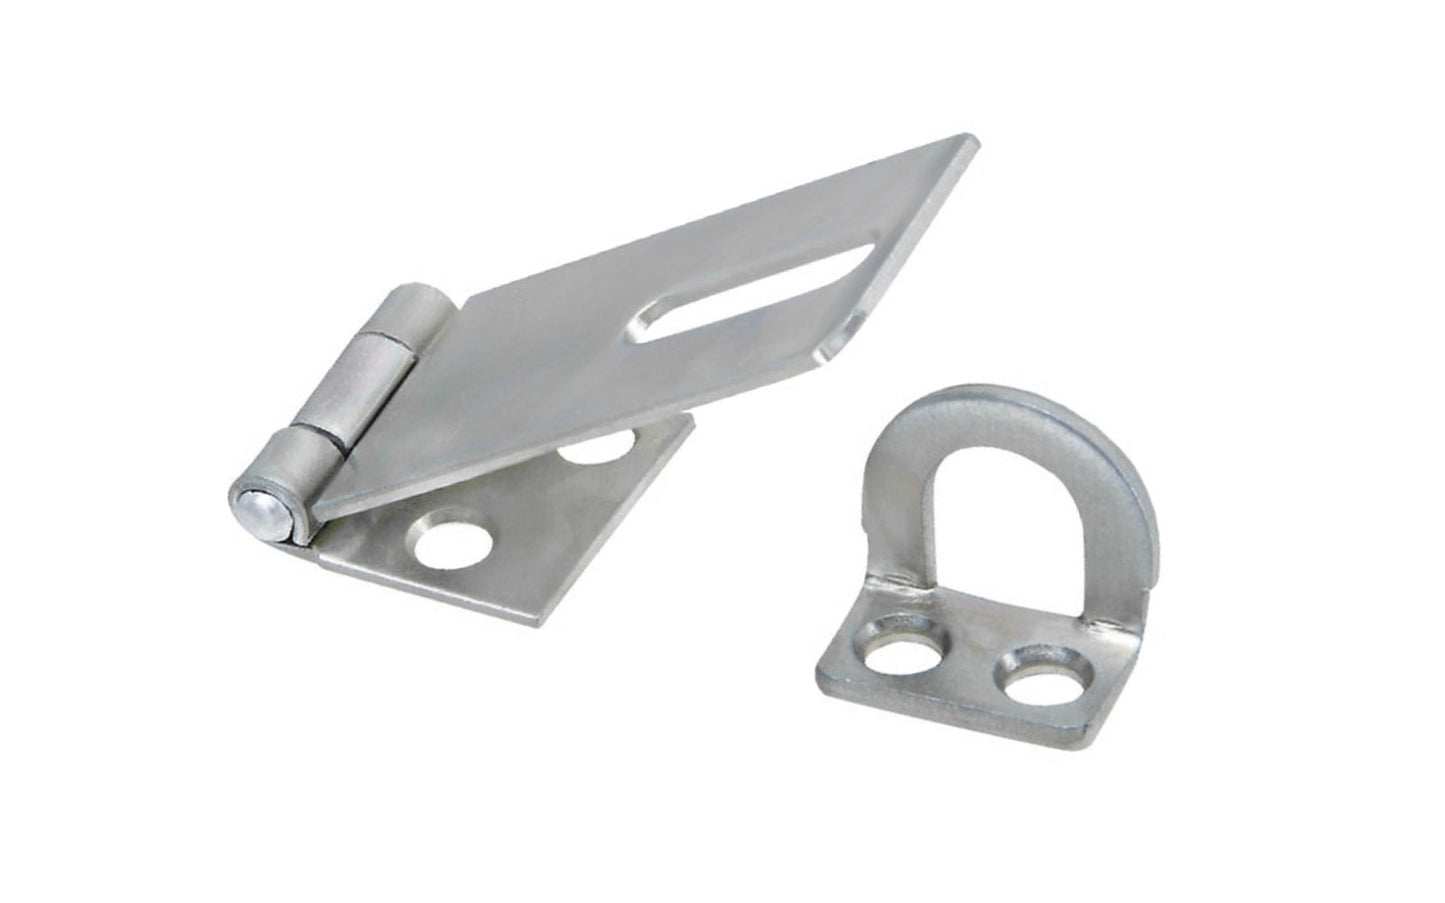 1-3/4" zinc-plated safety hasp is designed to secure a wide variety of cabinets, small doors, boxes, trunks, & more. For security, all screws are concealed when hasp is closed. Includes rigid, non-swivel staple. National Hardware Model N102-020. 038613102026. Plated to withstand weather conditions & prevent corrosion.